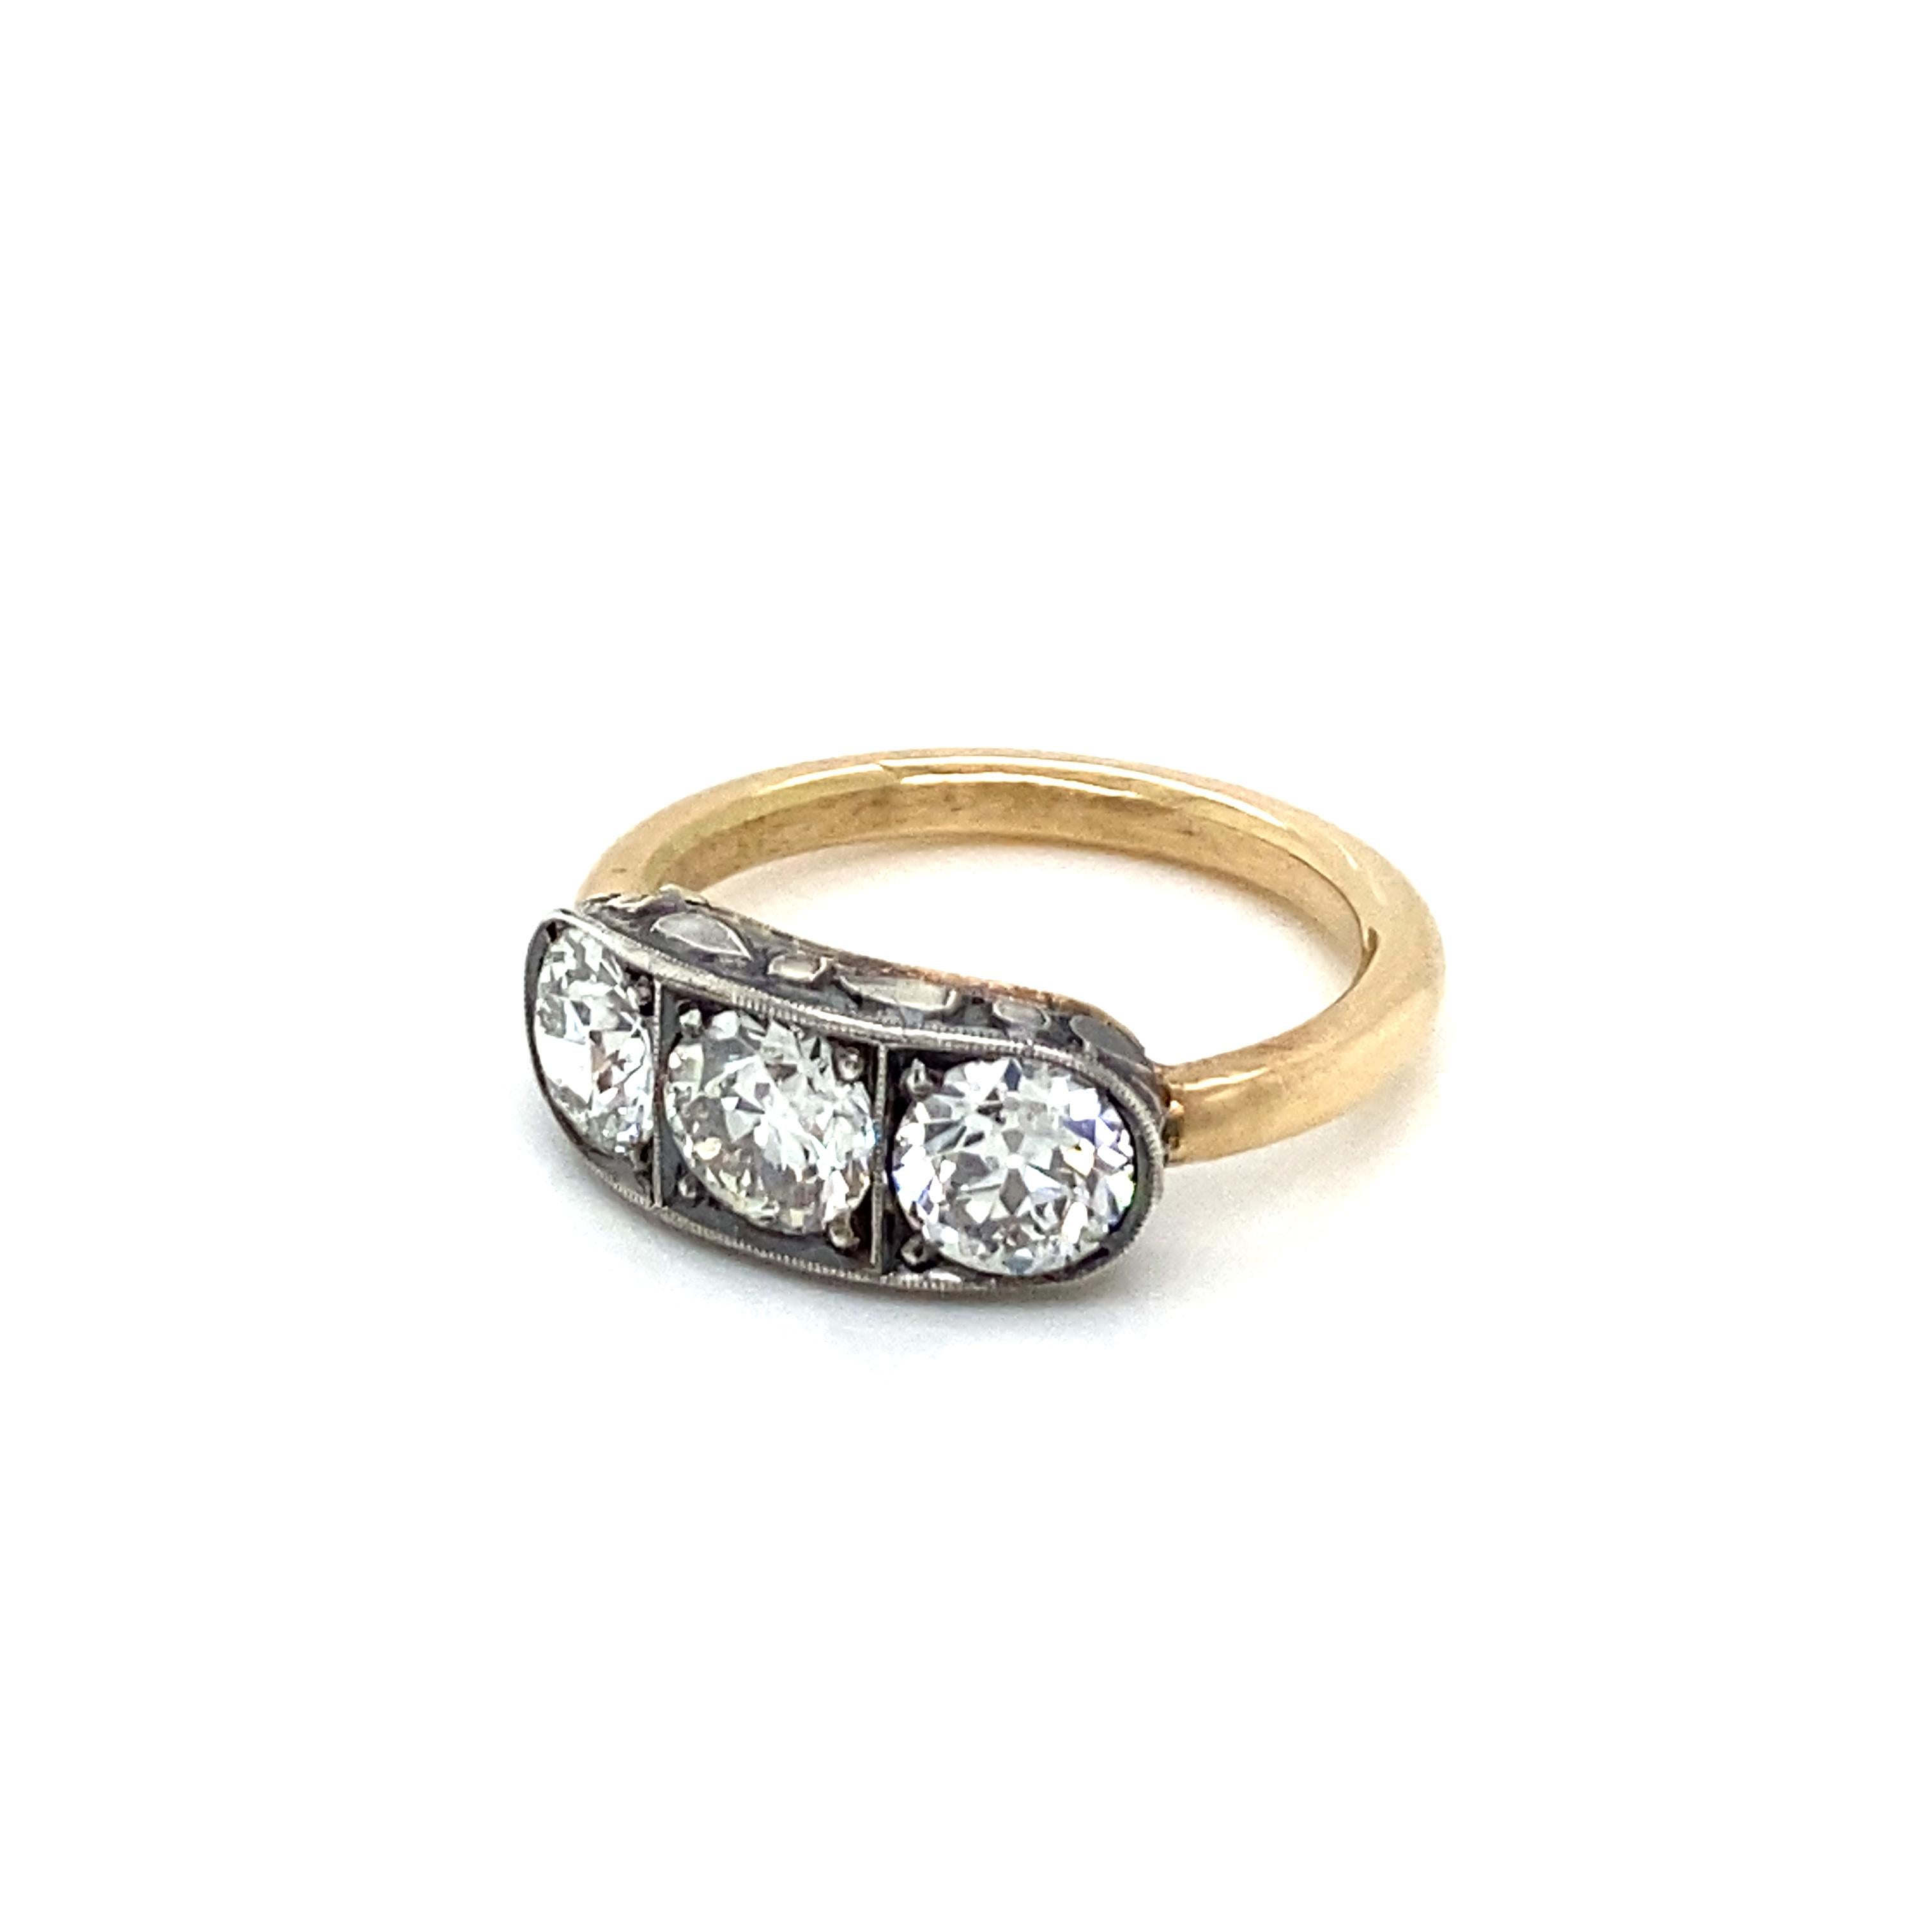 A Classic from 1930s. Old mine cut Diamond Yellow and white gold handmade ring.
It features three Sparkling Old Mine cut Diamonds approx. tot. 2.10 cts, H color VS clarity. Very nice, to note, the engraving work on the mount.

CONDITION: Pre-owned -